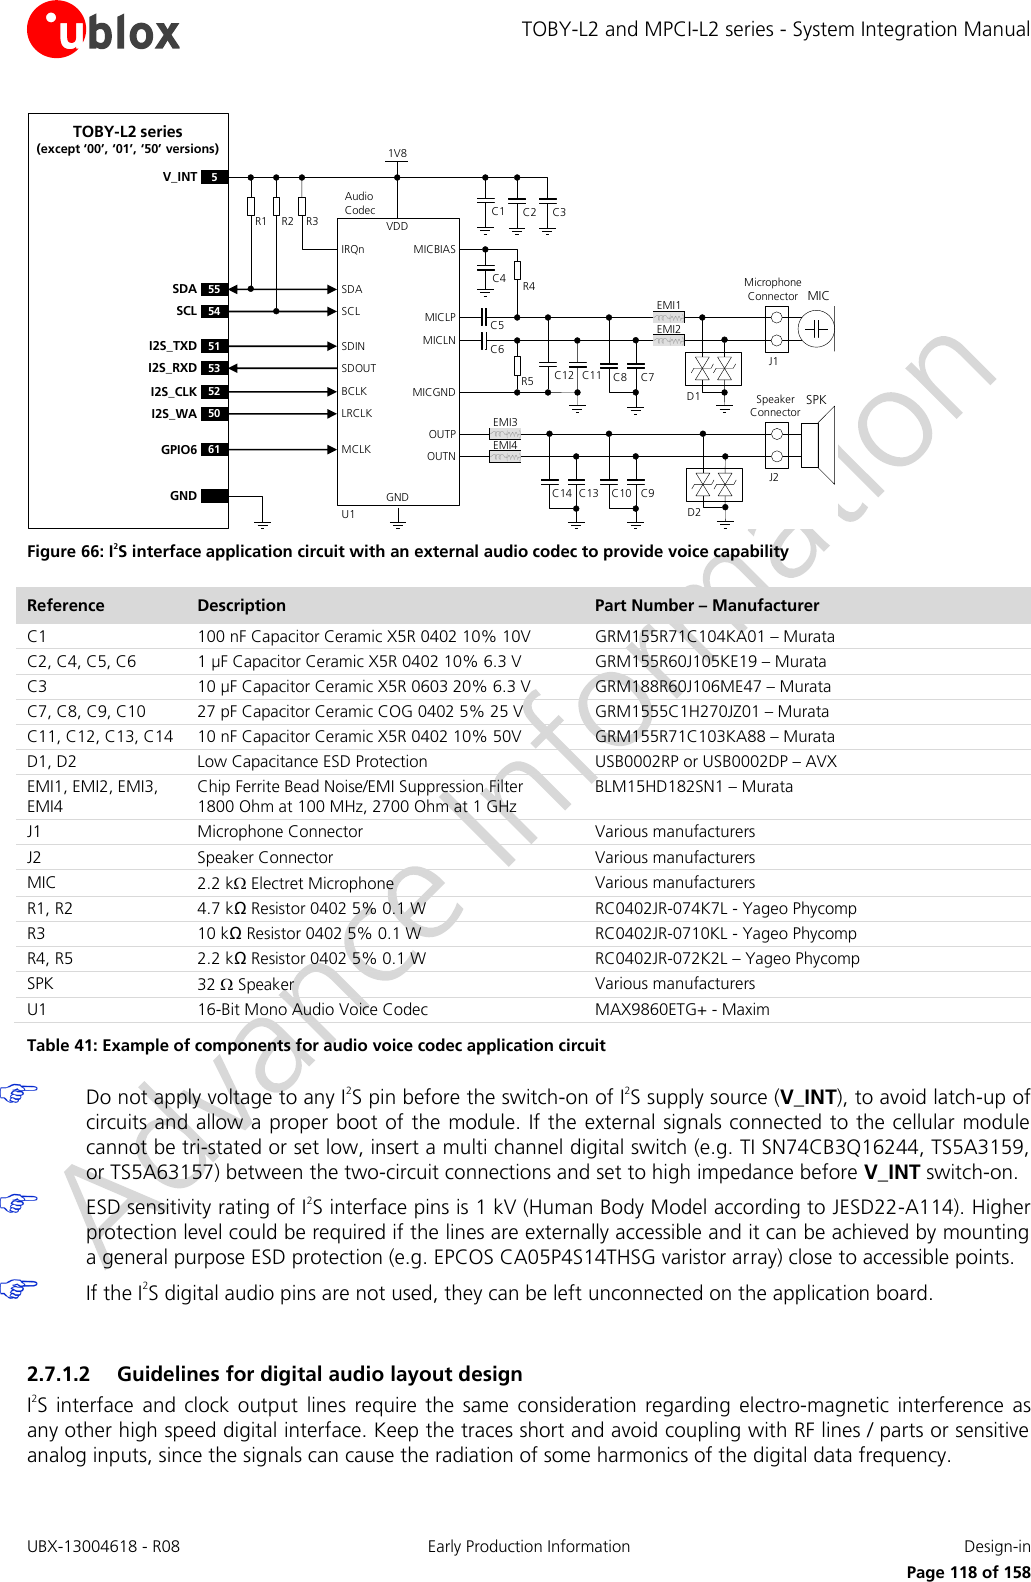 TOBY-L2 and MPCI-L2 series - System Integration Manual UBX-13004618 - R08  Early Production Information  Design-in     Page 118 of 158 TOBY-L2 series        (except ‘00’, ‘01’, ‘50’ versions)GPIO6R2R1BCLKGNDU1LRCLKAudio   CodecSDINSDOUT55SDA54SCLSDASCL61 MCLKGNDIRQnR3 C3C2C15V_INTVDD1V8MICBIASC4 R4C5C6EMI1MICLNMICLPD1Microphone ConnectorEMI2MICC12 C11J1MICGND R5 C8 C7D2SPKSpeaker ConnectorOUTPOUTNJ2C10 C9C14 C13EMI3EMI452I2S_CLK50I2S_WA51I2S_TXD53I2S_RXD Figure 66: I2S interface application circuit with an external audio codec to provide voice capability Reference Description Part Number – Manufacturer C1 100 nF Capacitor Ceramic X5R 0402 10% 10V GRM155R71C104KA01 – Murata C2, C4, C5, C6 1 µF Capacitor Ceramic X5R 0402 10% 6.3 V GRM155R60J105KE19 – Murata C3 10 µF Capacitor Ceramic X5R 0603 20% 6.3 V GRM188R60J106ME47 – Murata C7, C8, C9, C10 27 pF Capacitor Ceramic COG 0402 5% 25 V  GRM1555C1H270JZ01 – Murata C11, C12, C13, C14 10 nF Capacitor Ceramic X5R 0402 10% 50V GRM155R71C103KA88 – Murata D1, D2 Low Capacitance ESD Protection USB0002RP or USB0002DP – AVX EMI1, EMI2, EMI3, EMI4 Chip Ferrite Bead Noise/EMI Suppression Filter 1800 Ohm at 100 MHz, 2700 Ohm at 1 GHz BLM15HD182SN1 – Murata J1 Microphone Connector Various manufacturers  J2 Speaker Connector Various manufacturers  MIC 2.2 k Electret Microphone Various manufacturers R1, R2  4.7 kΩ Resistor 0402 5% 0.1 W  RC0402JR-074K7L - Yageo Phycomp R3 10 kΩ Resistor 0402 5% 0.1 W  RC0402JR-0710KL - Yageo Phycomp R4, R5 2.2 kΩ Resistor 0402 5% 0.1 W  RC0402JR-072K2L – Yageo Phycomp SPK 32  Speaker Various manufacturers  U1 16-Bit Mono Audio Voice Codec MAX9860ETG+ - Maxim Table 41: Example of components for audio voice codec application circuit  Do not apply voltage to any I2S pin before the switch-on of I2S supply source (V_INT), to avoid latch-up of circuits and allow a proper boot of the module. If the  external signals connected to the cellular module cannot be tri-stated or set low, insert a multi channel digital switch (e.g. TI SN74CB3Q16244, TS5A3159, or TS5A63157) between the two-circuit connections and set to high impedance before V_INT switch-on.  ESD sensitivity rating of I2S interface pins is 1 kV (Human Body Model according to JESD22-A114). Higher protection level could be required if the lines are externally accessible and it can be achieved by mounting a general purpose ESD protection (e.g. EPCOS CA05P4S14THSG varistor array) close to accessible points.  If the I2S digital audio pins are not used, they can be left unconnected on the application board.  2.7.1.2 Guidelines for digital audio layout design I2S  interface  and  clock  output  lines  require  the  same  consideration  regarding  electro-magnetic  interference  as any other high speed digital interface. Keep the traces short and avoid coupling with RF lines / parts or sensitive analog inputs, since the signals can cause the radiation of some harmonics of the digital data frequency. 